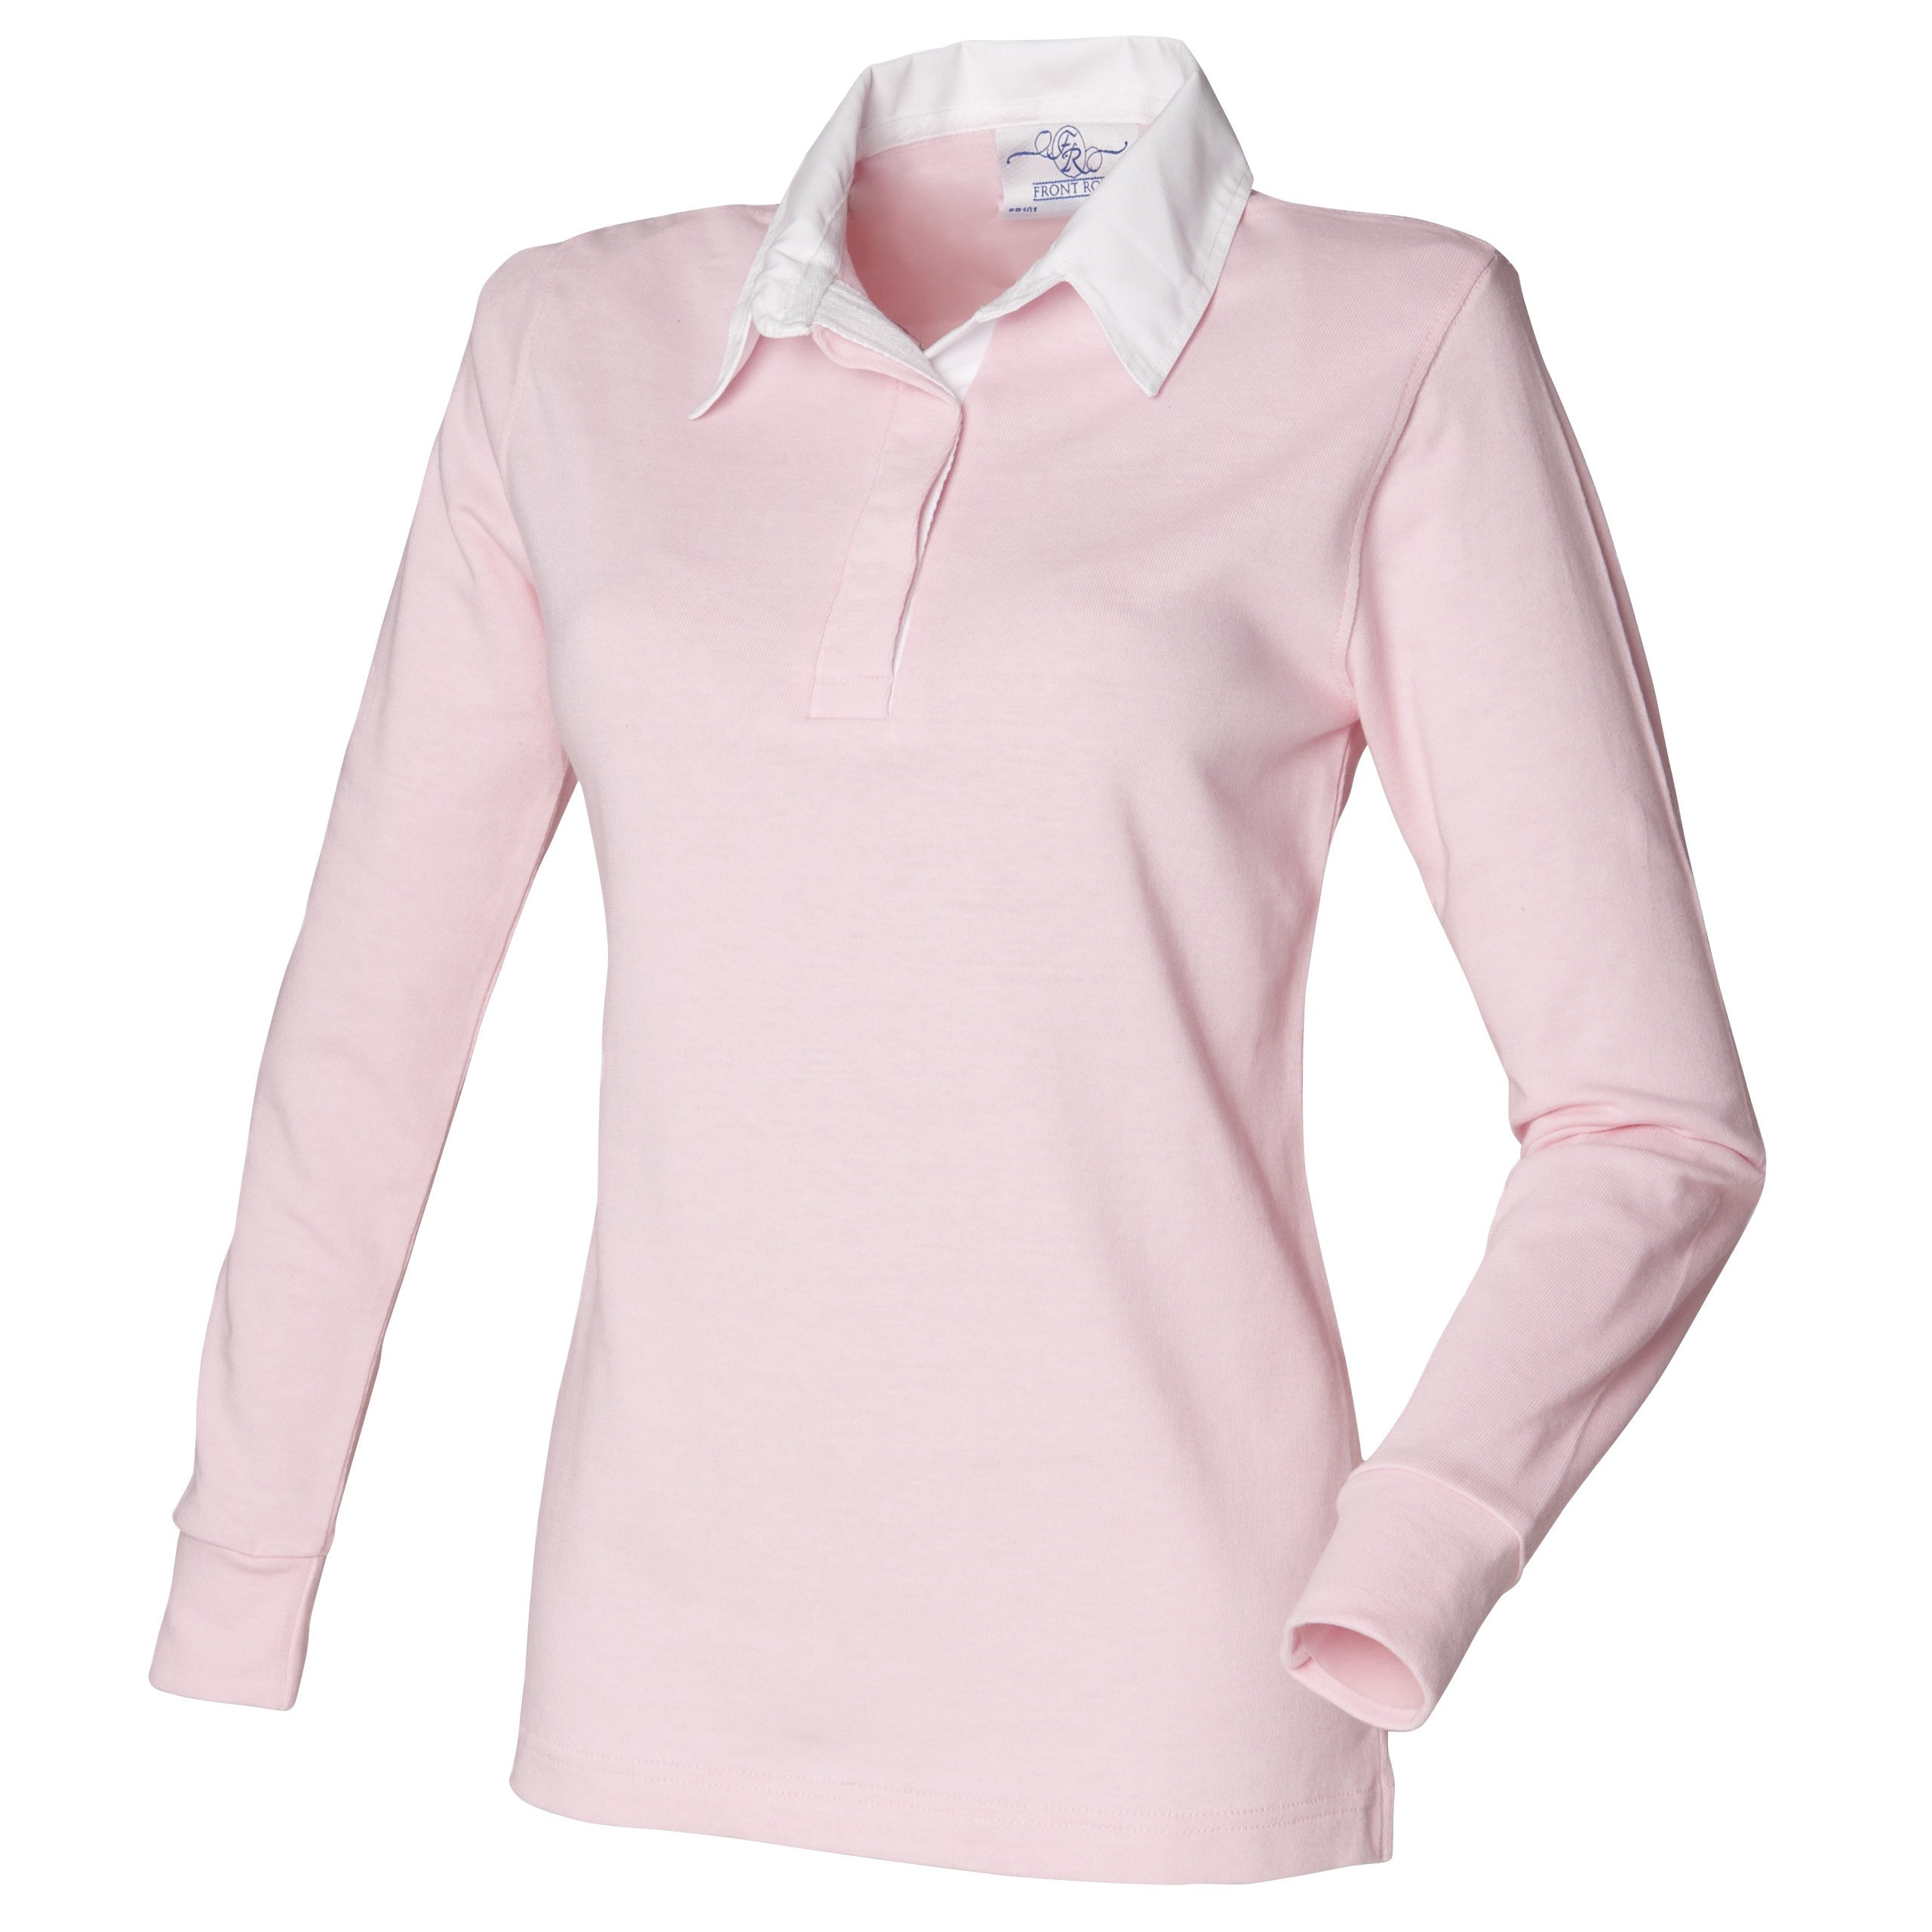 Ladies Rugby Shirt | Treehouse Online